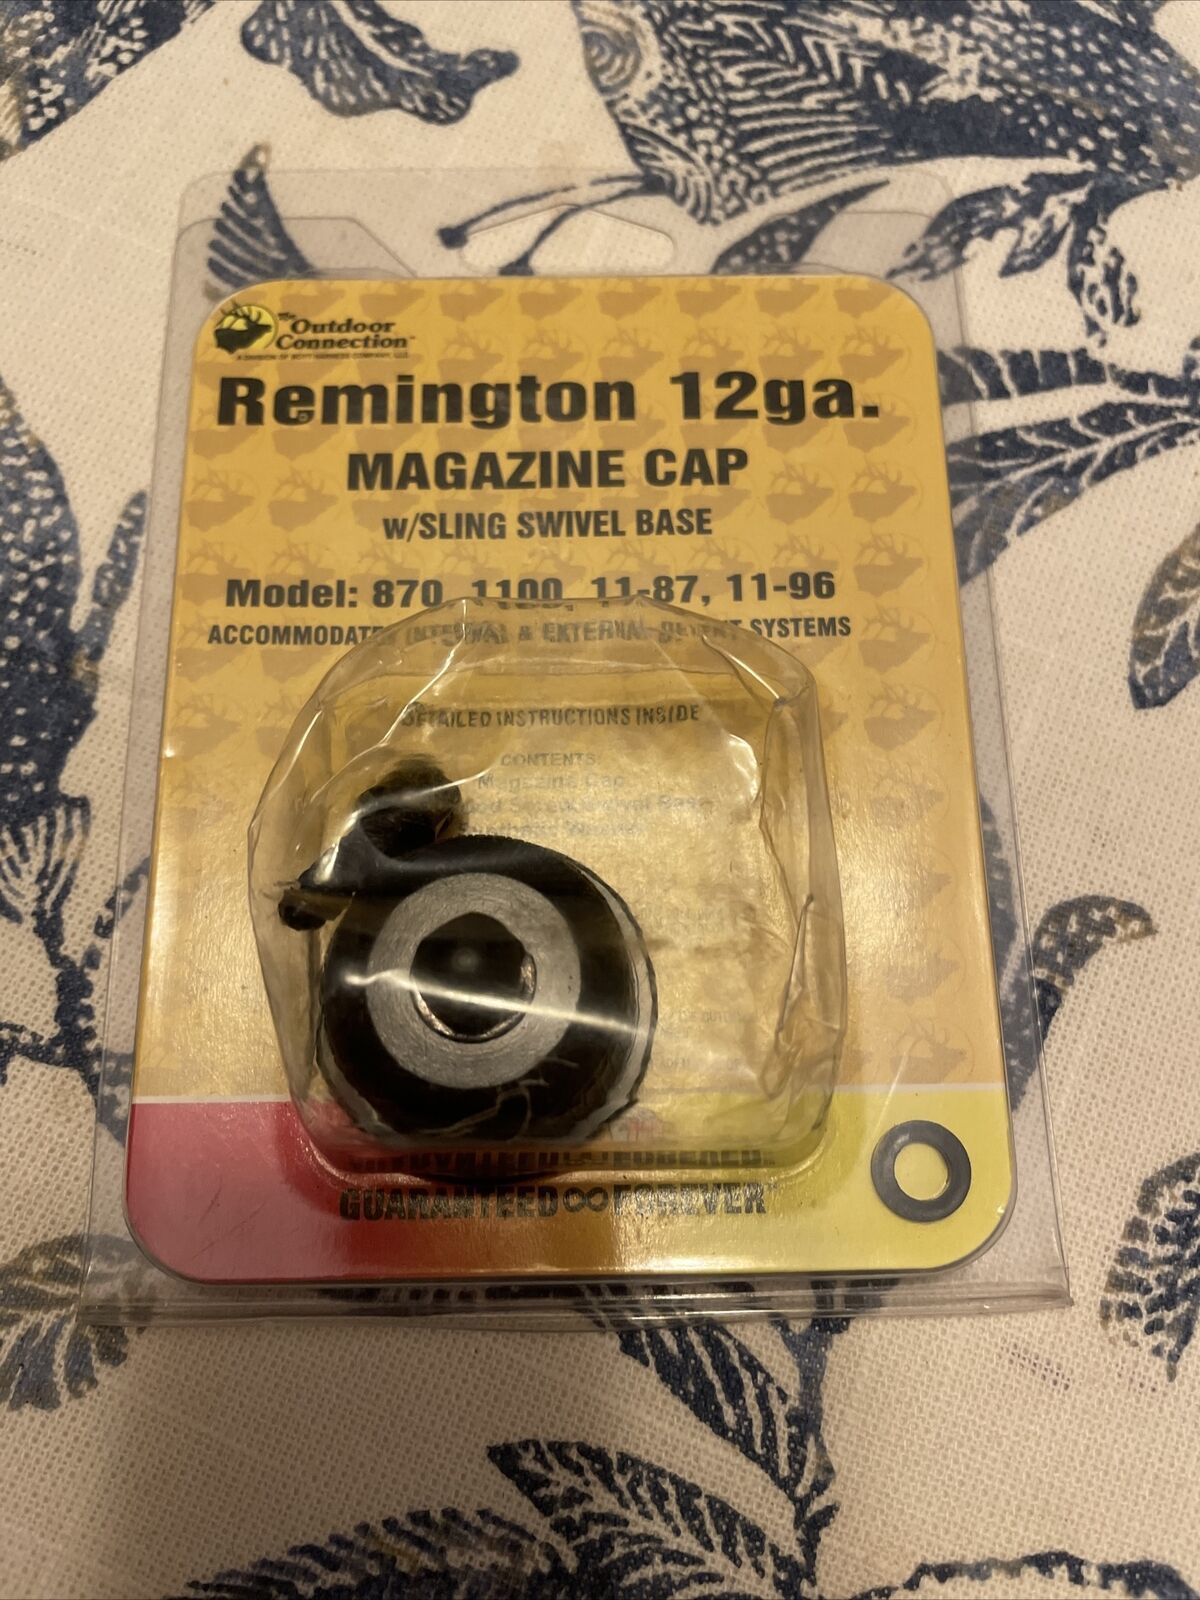 Primary image for The Outdoor Connection TSC-79523 Remington 12GA Magazine Cap W/Sling Swivel Base